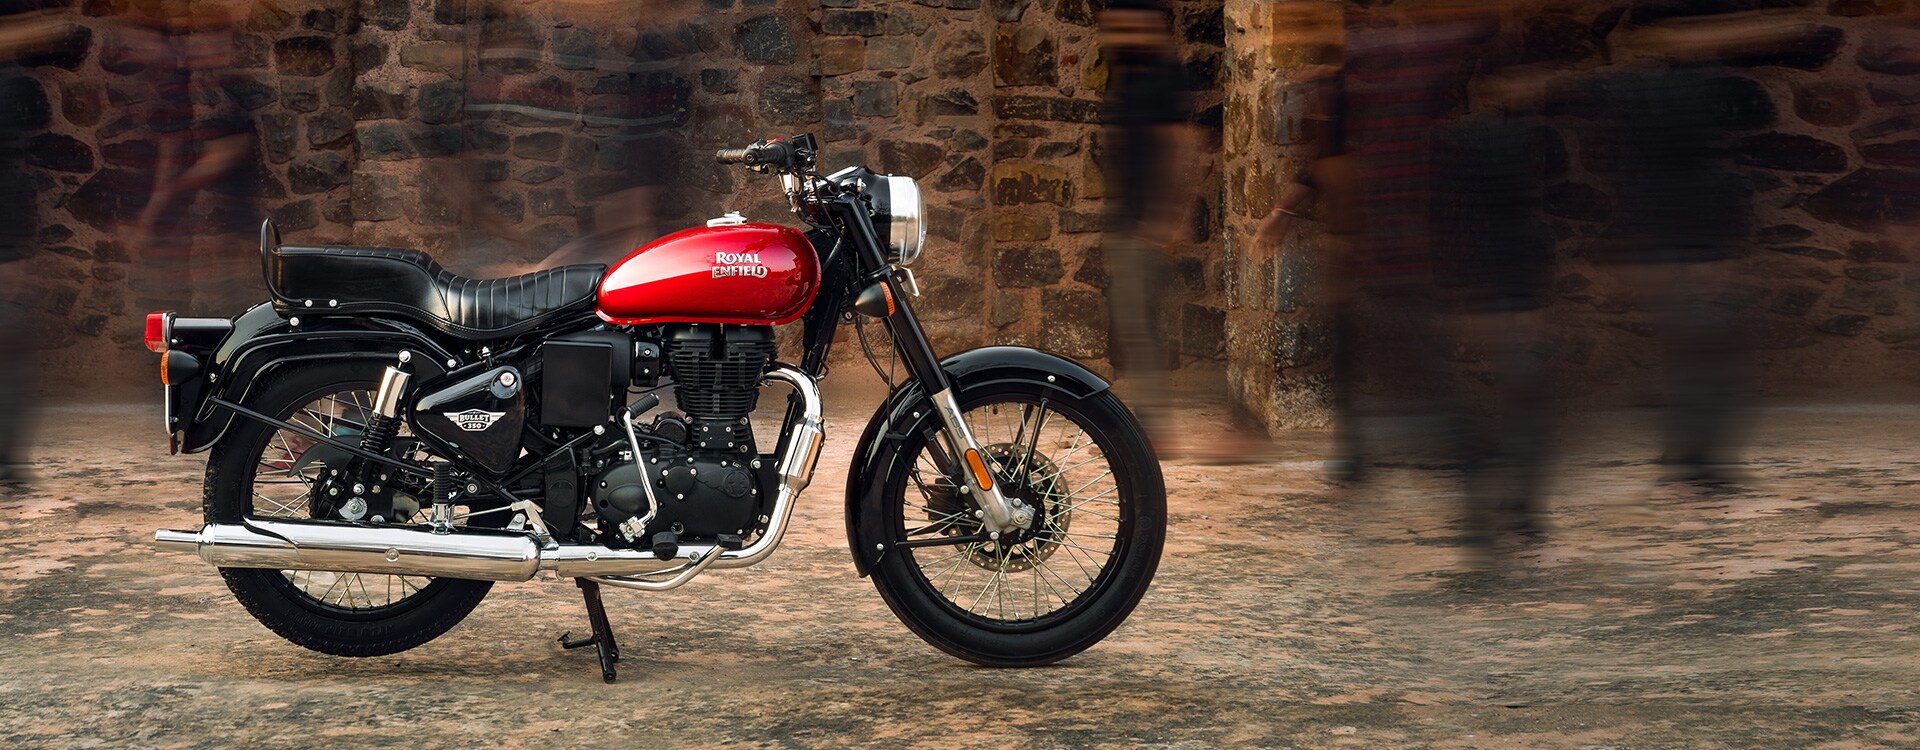 RE Bullet 350 ES Price, Colours, Images & Mileage in India | Royal ...